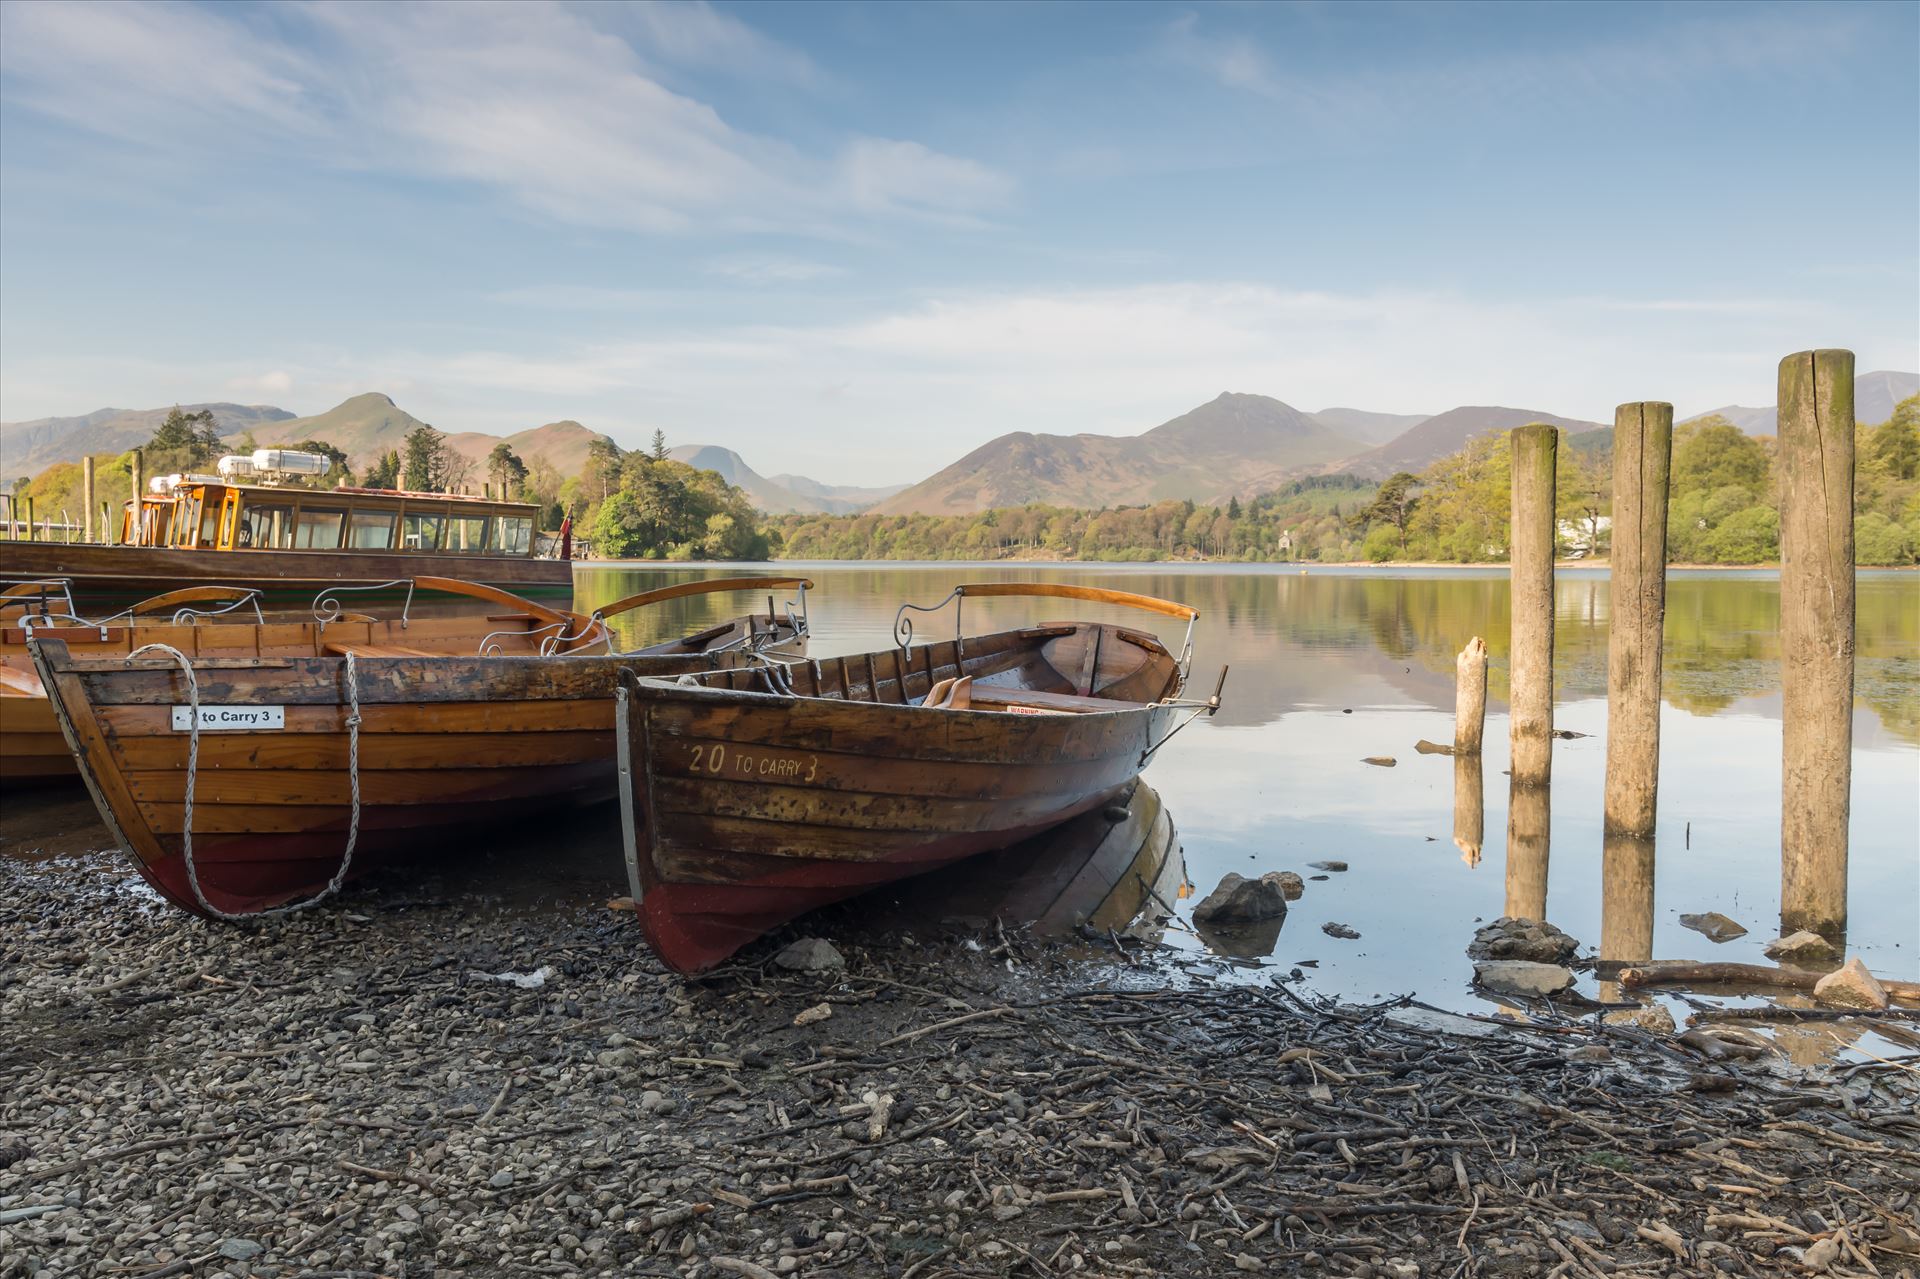 Derwentwater, nr Keswick - Derwentwater is one of the principal bodies of water in the Lake District National Park in north west England. by philreay